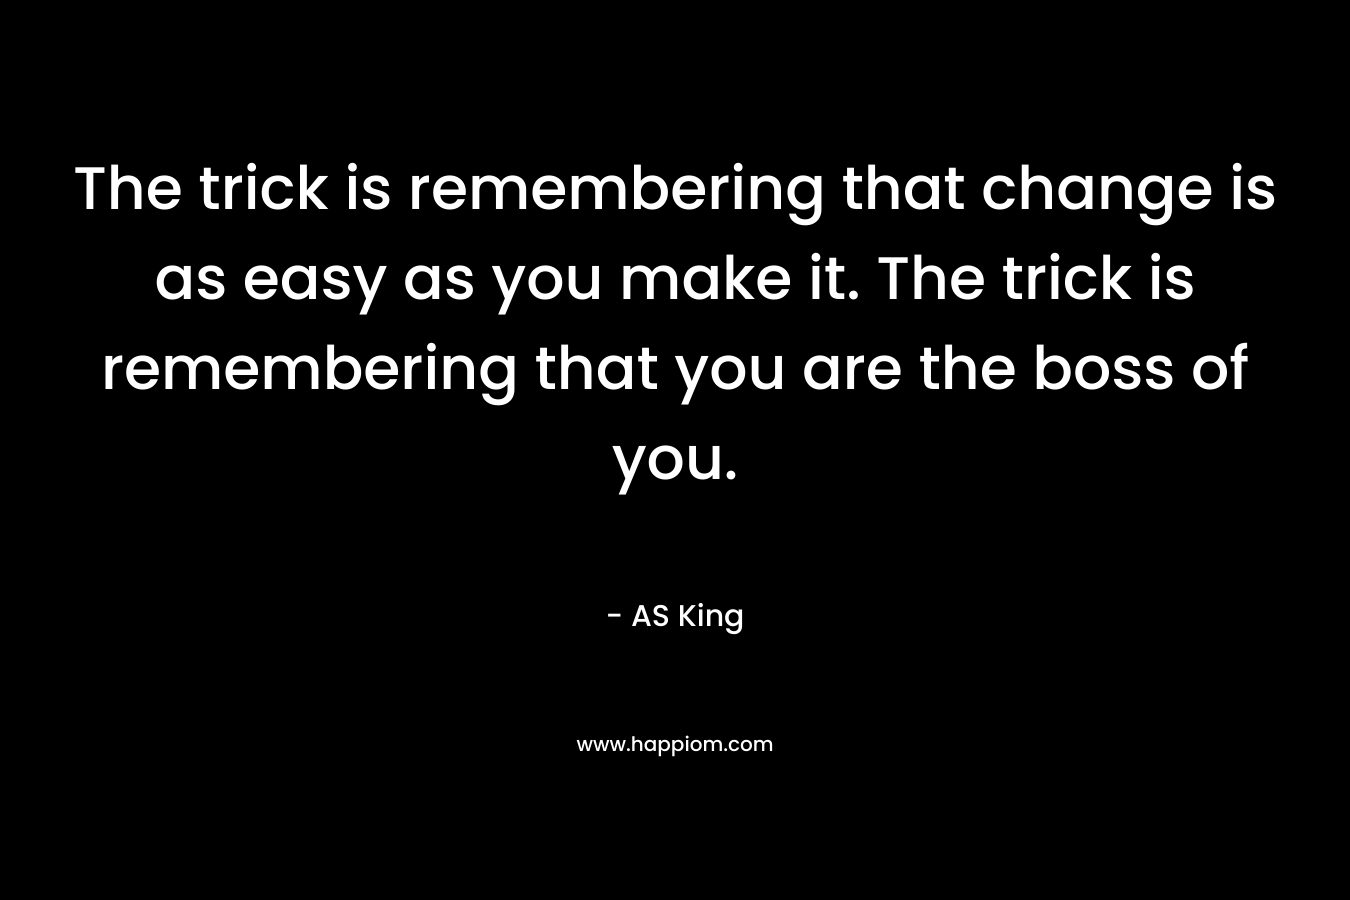 The trick is remembering that change is as easy as you make it. The trick is remembering that you are the boss of you.